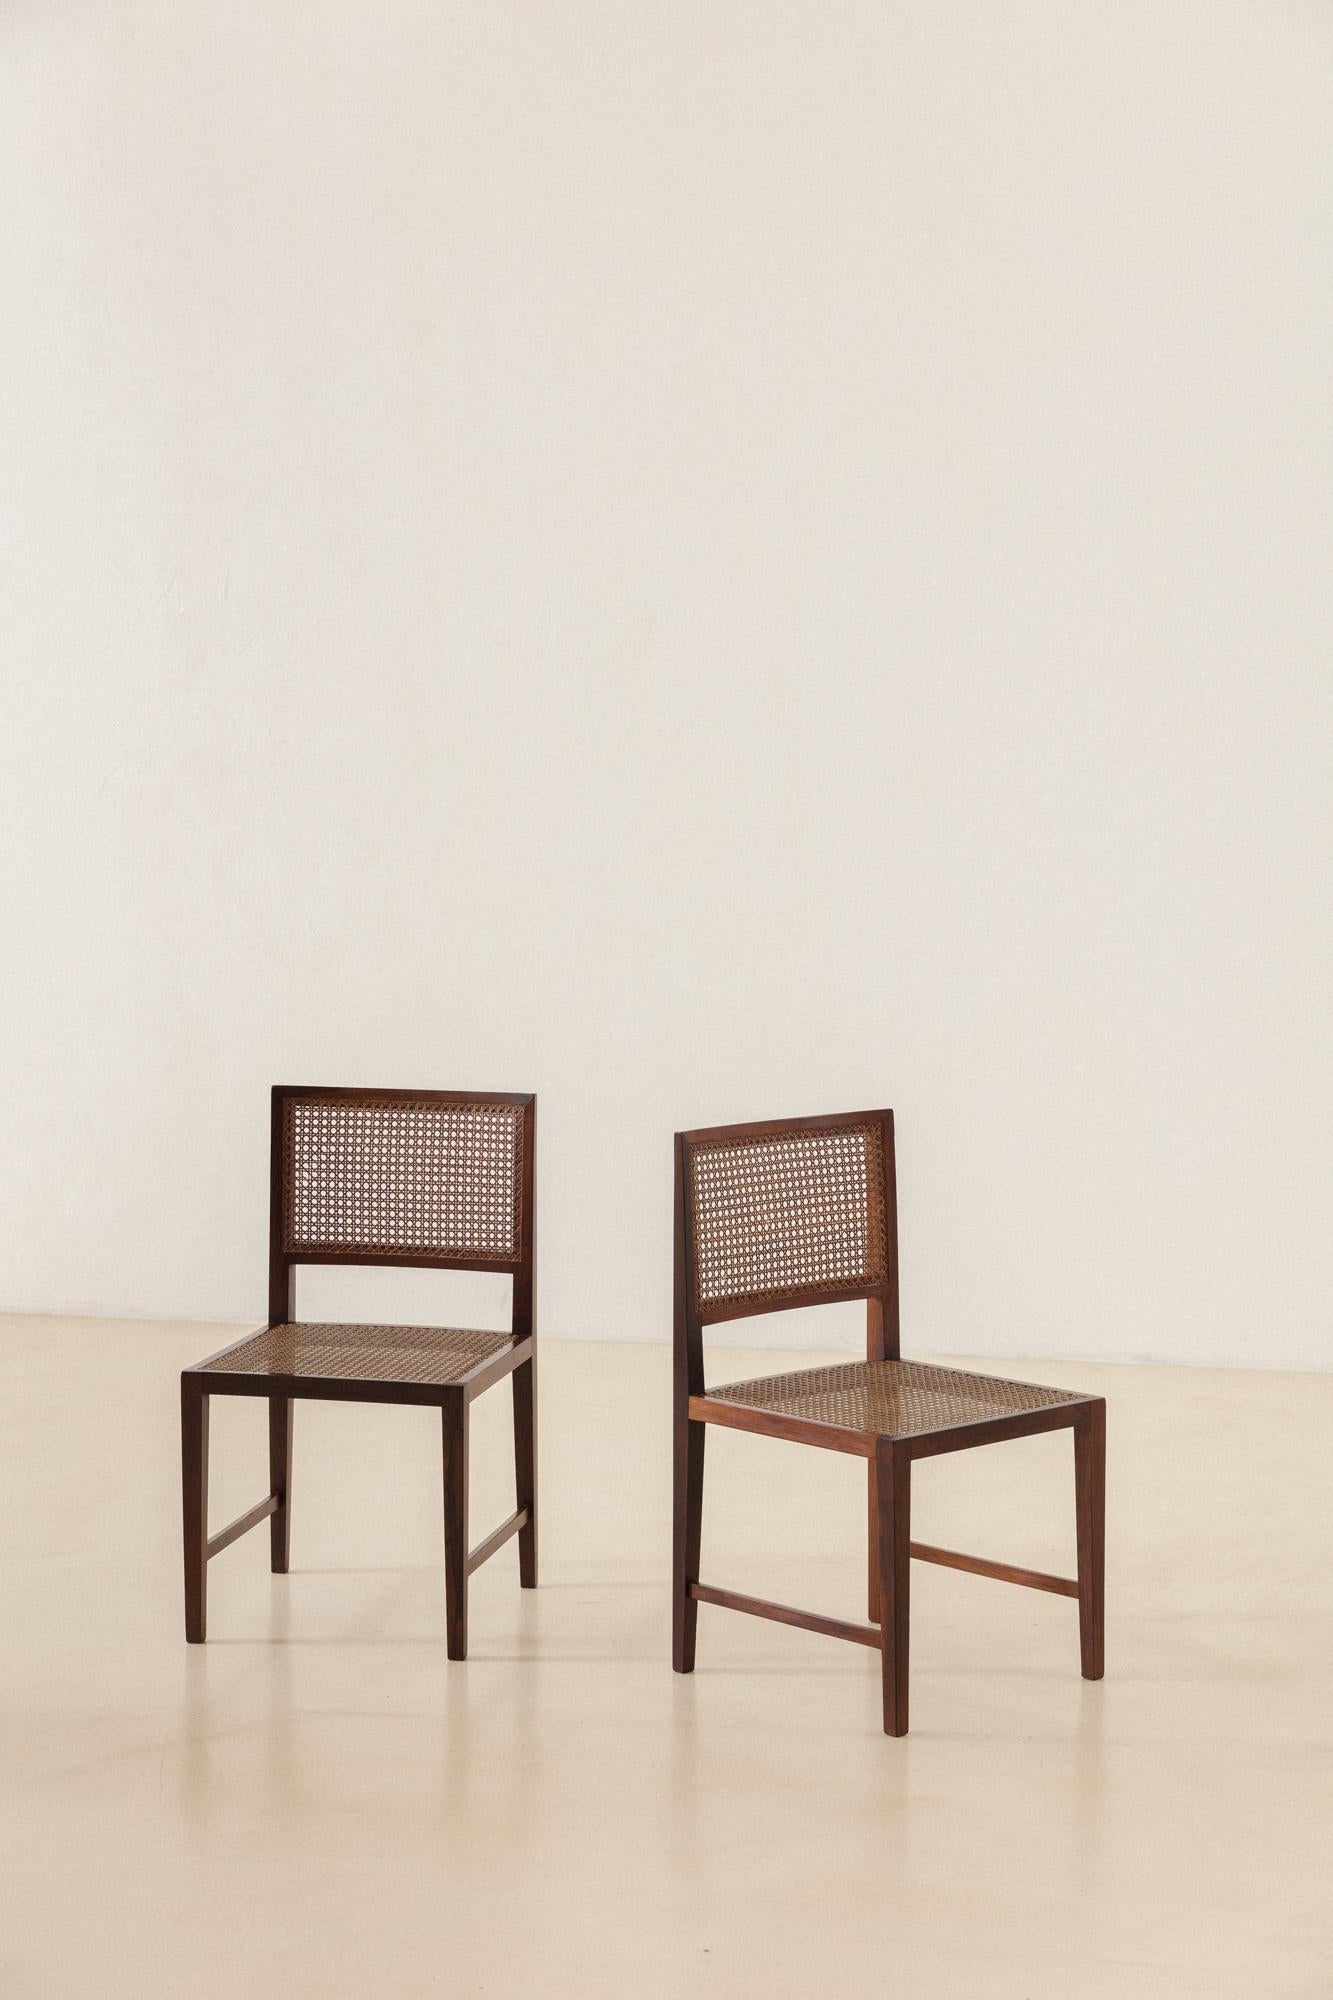 Rosewood and Cane Dining Chairs, M.L. Magalhães, 1960s, Midcentury Brazilian 4